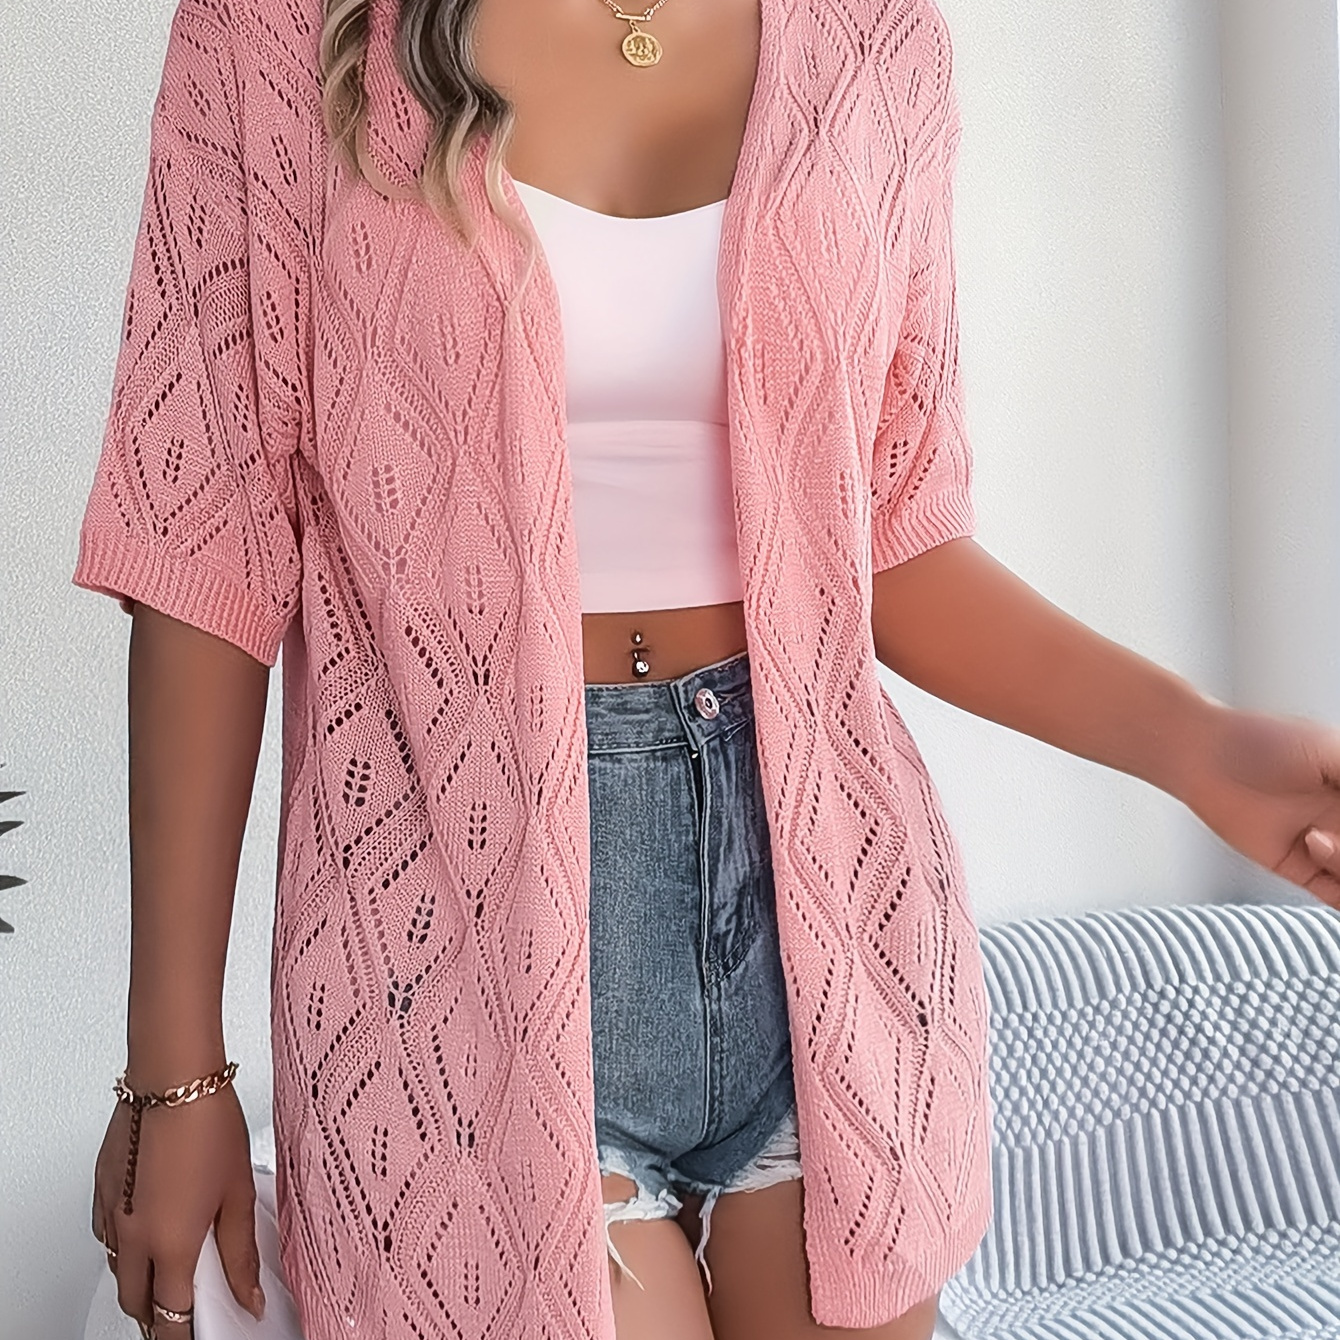 

Solid Color Open Front Cardigans, Elegant Collarless Cut Out Short Sleeve Knitted Cardigans Top For Spring & Summer, Women's Clothing